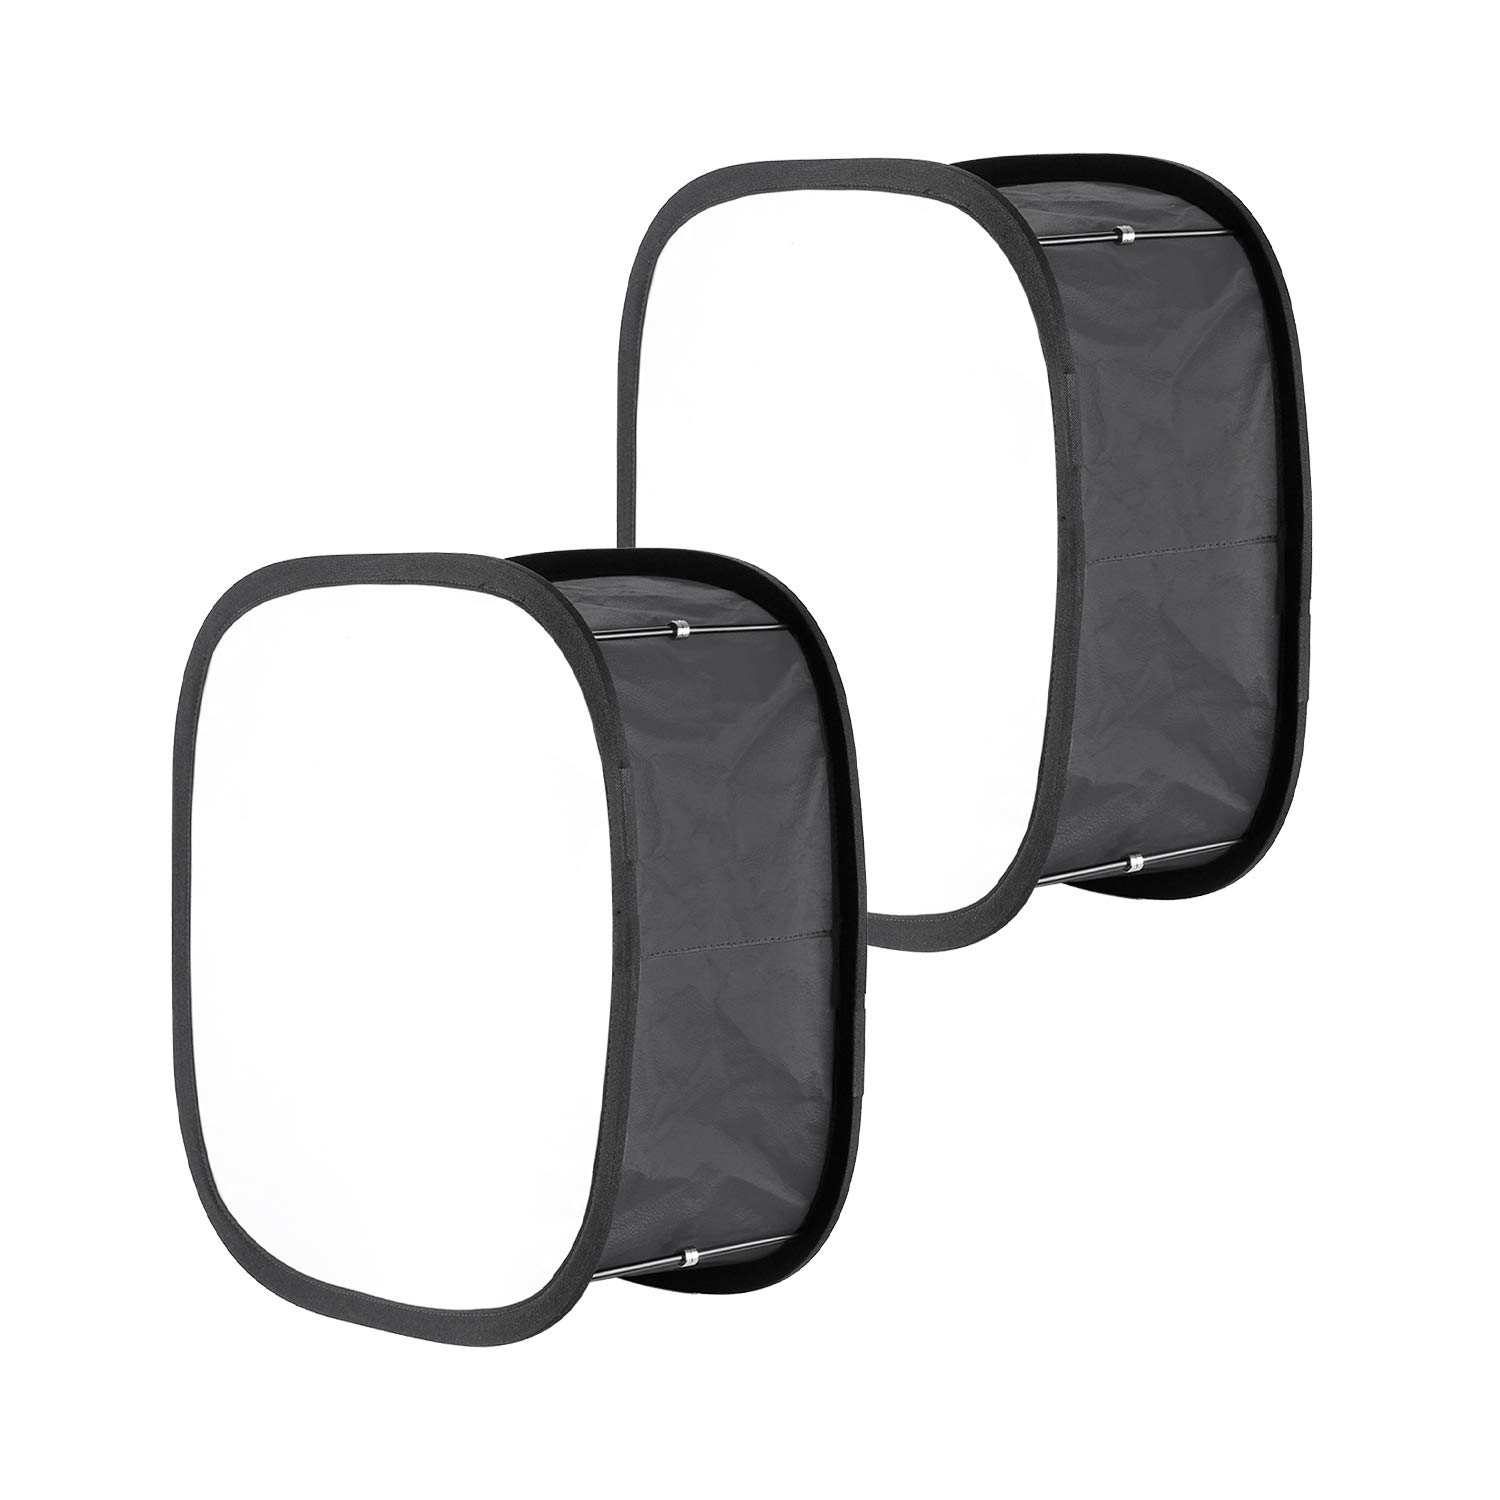 2 Packs LED Light Panel Softbox for 660 LED Panel: 9.25x9.25 inches Opening, Foldable Light Diffuser with Strap Attachment and Carrying Bag for Photo Studio Shooting Portrait Photography-OXIMETERBUY